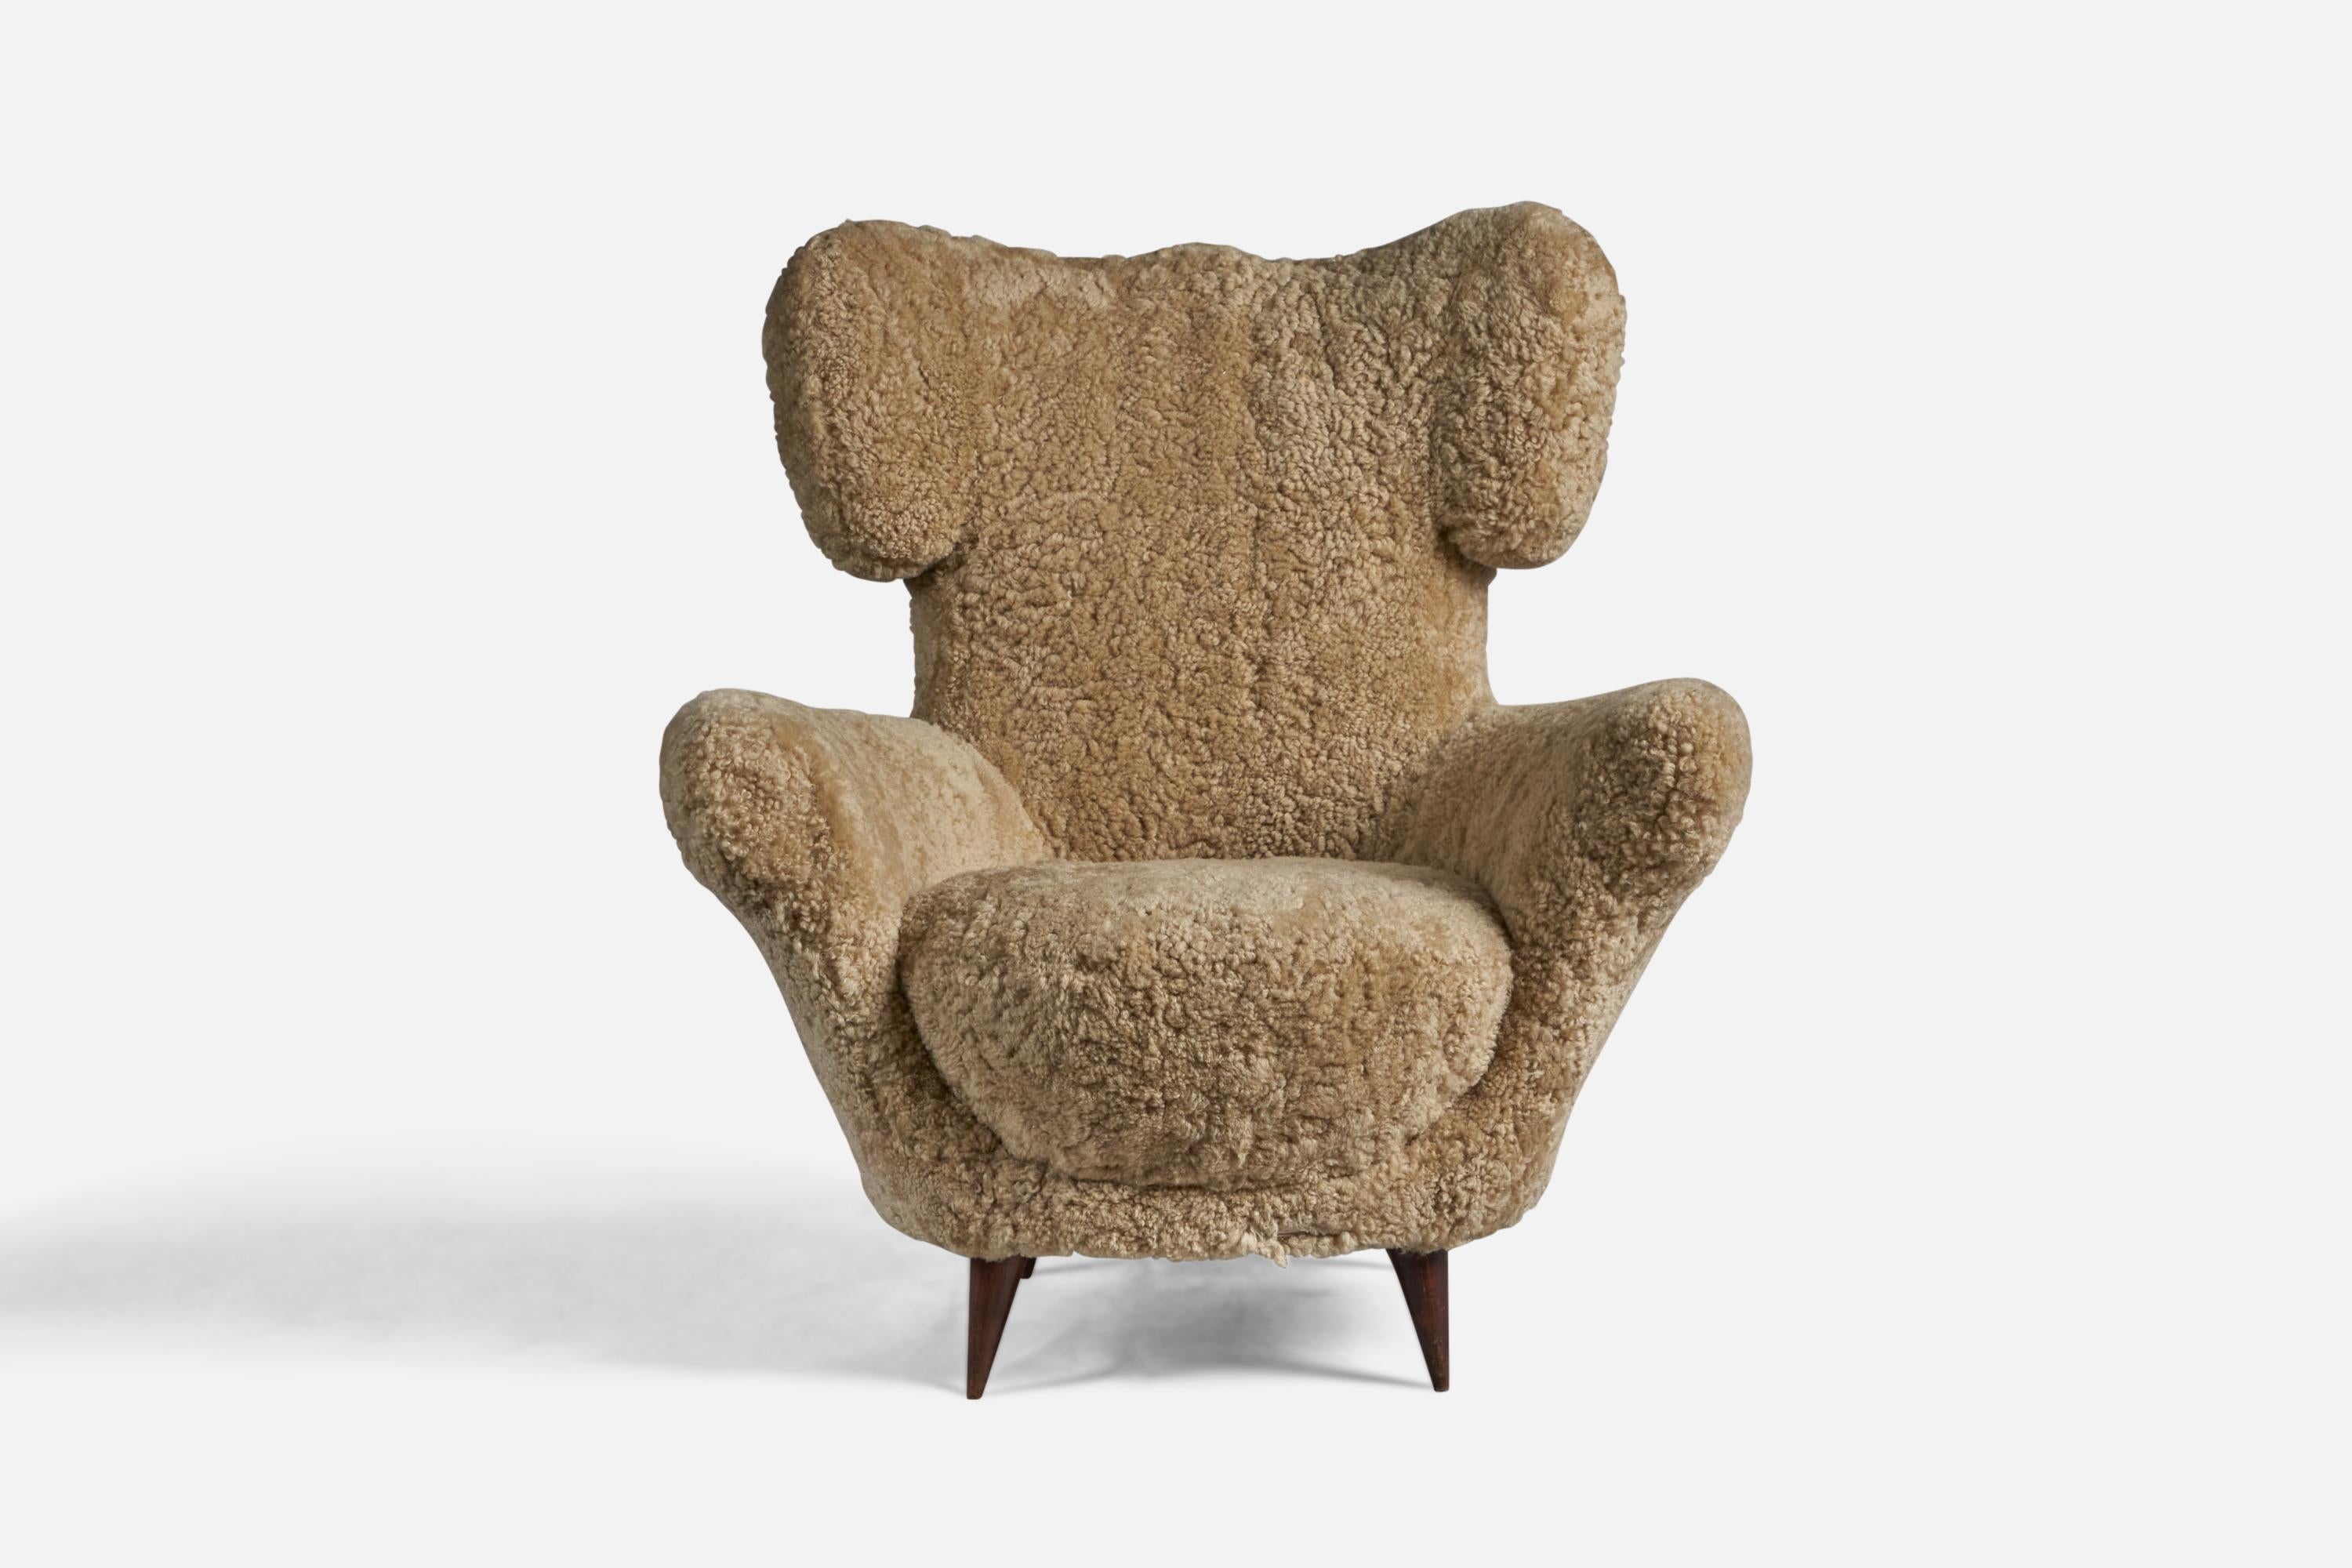 Organic Modern Maurizio Tempestini Attribution, Lounge Chairs, Wood, Shearling, Italy, 1940s For Sale